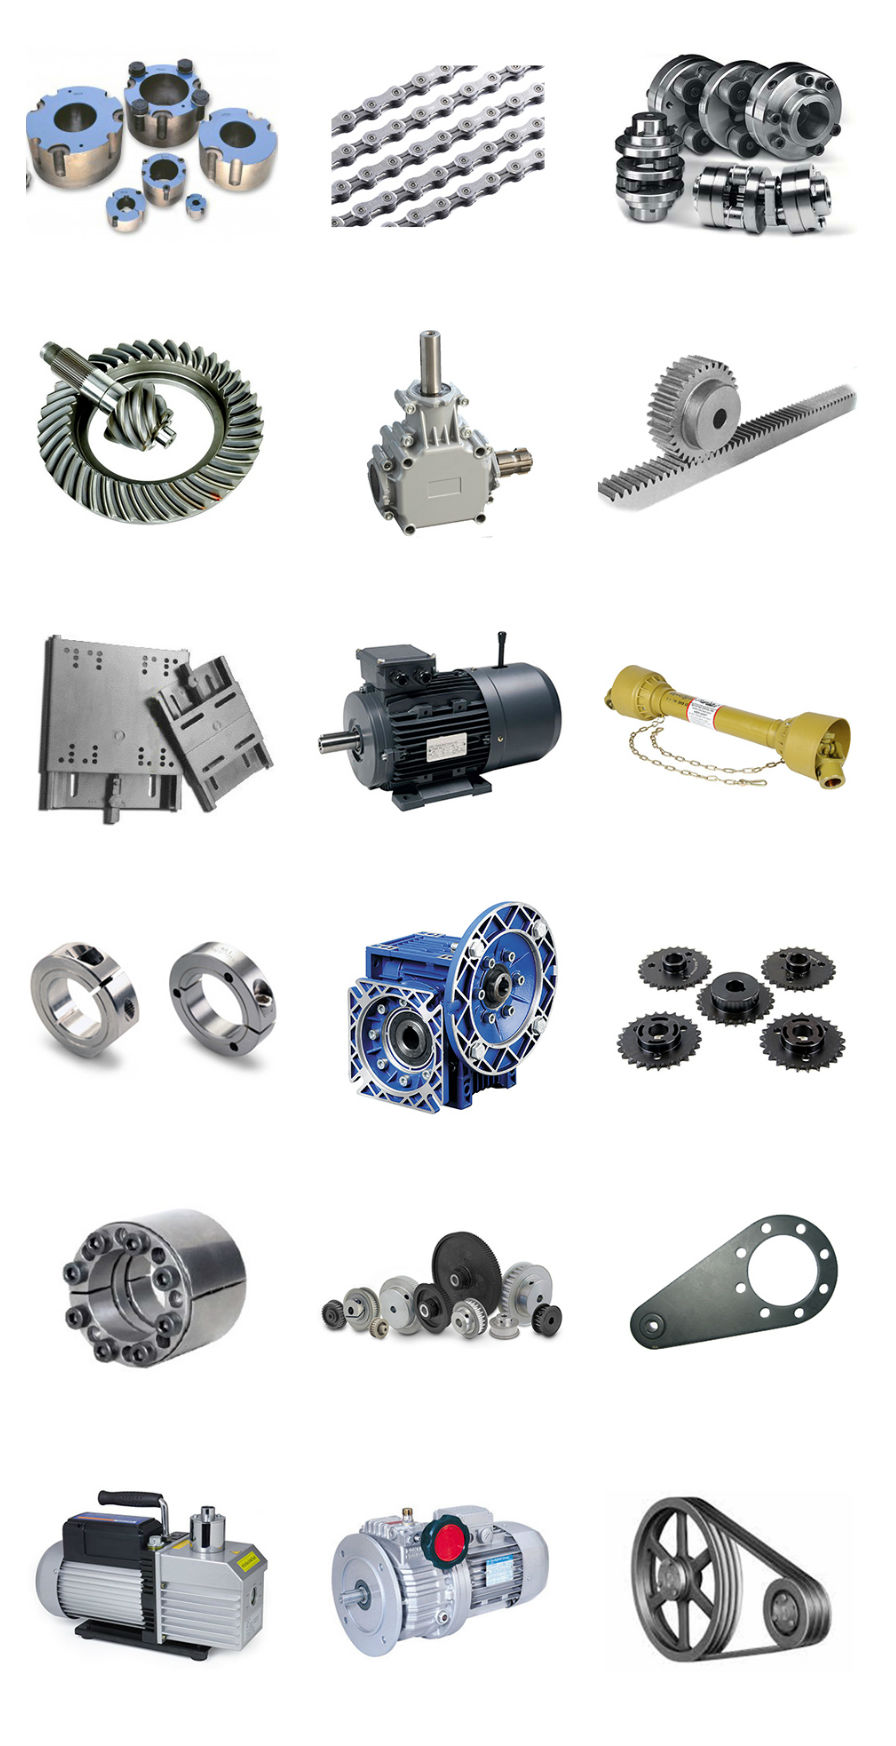 ND Hot Selling in Europe Gear Box Transmission Gear Digger Gearbox with Competitive Price